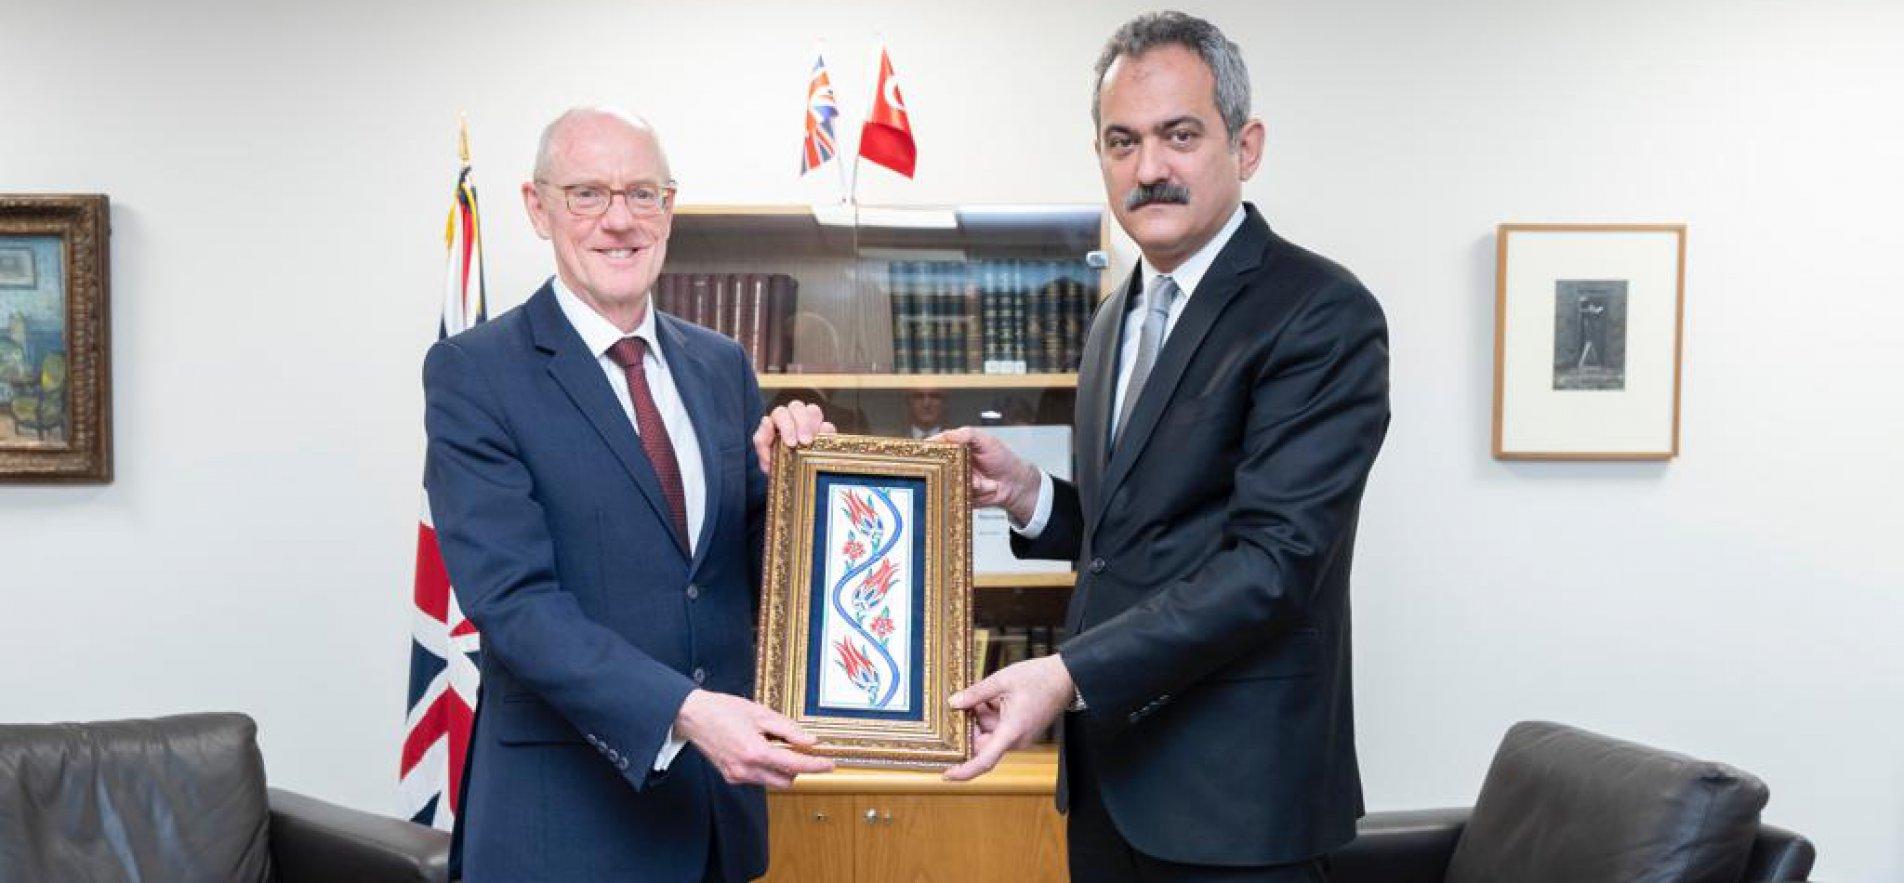 MINISTER ÖZER MEETS WITH HIS BRITISH COUNTERPART GIBB